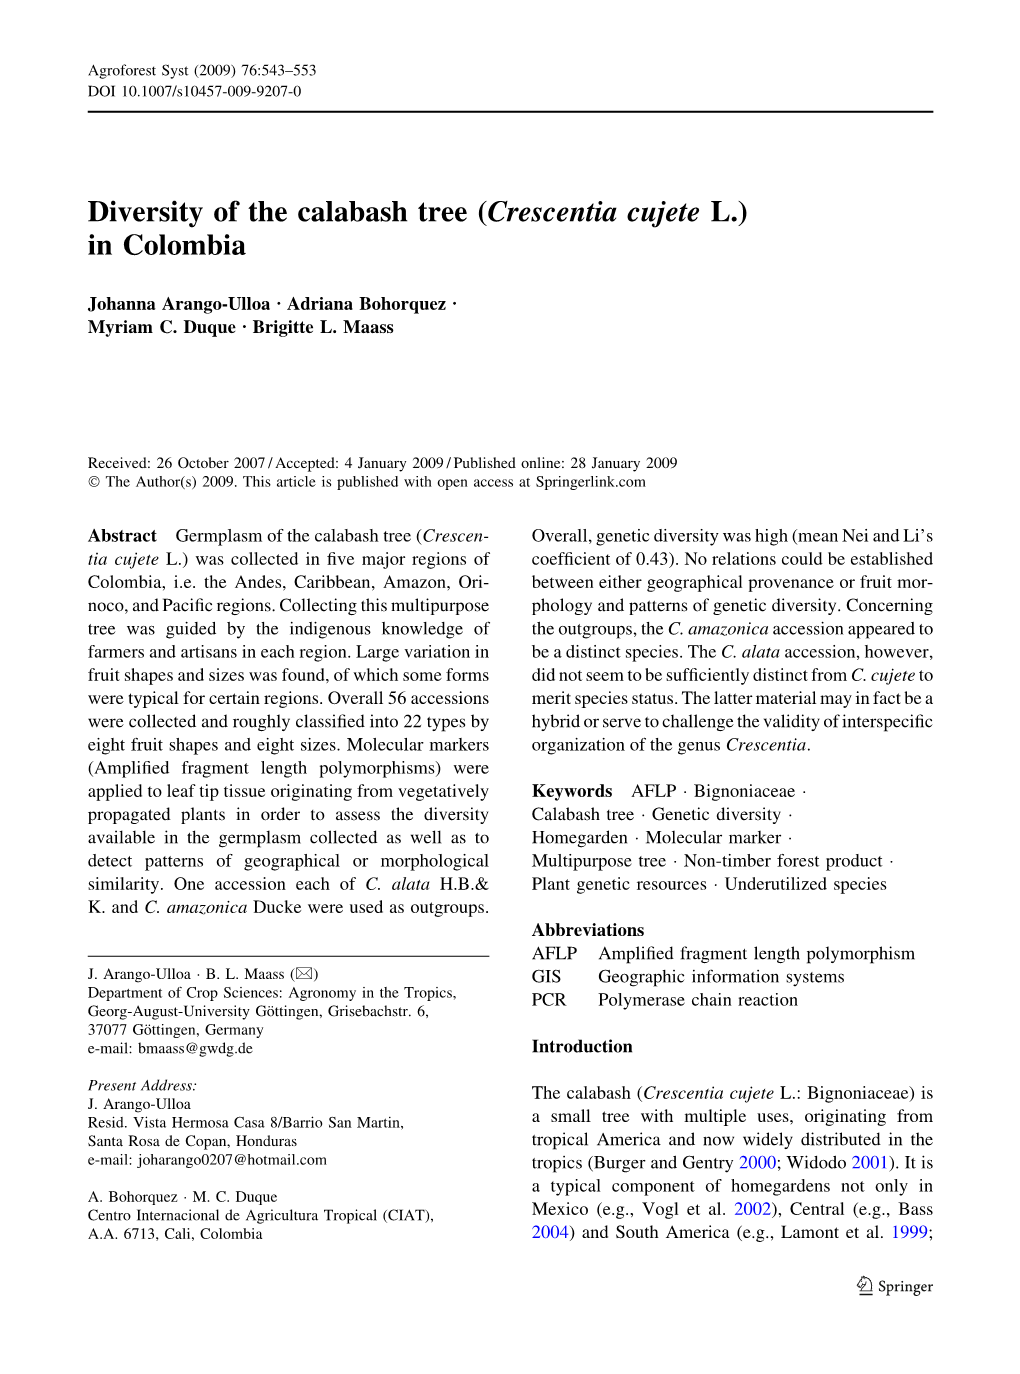 Diversity of the Calabash Tree (Crescentia Cujete L.) in Colombia